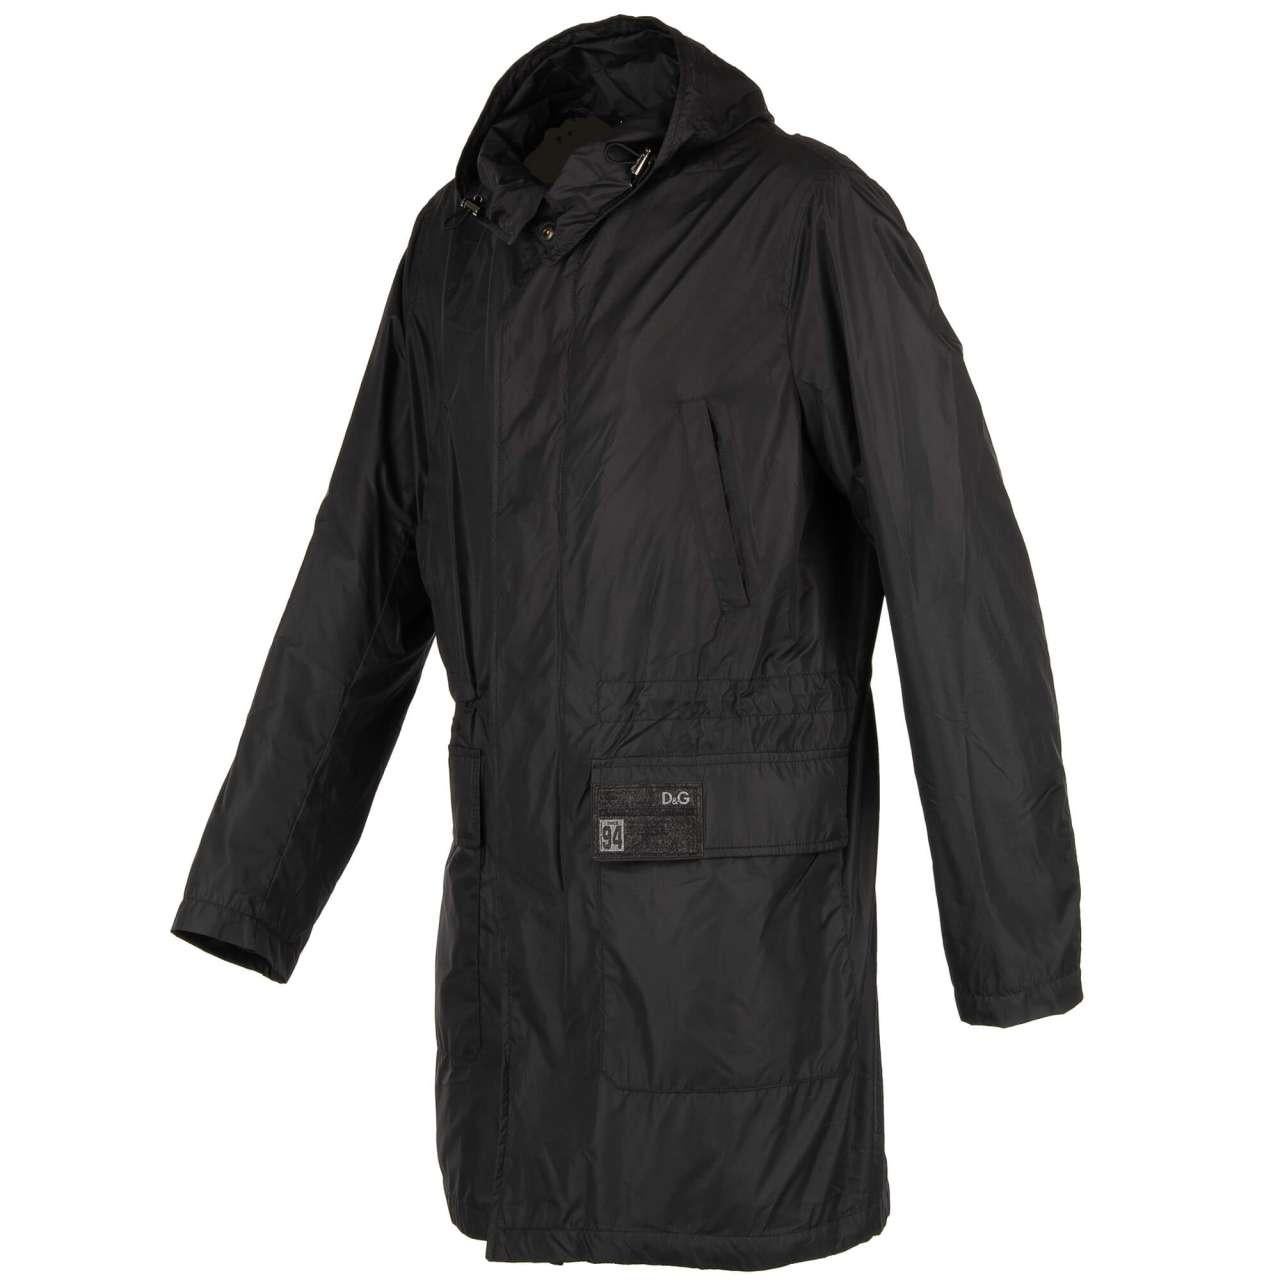 Dolce & Gabbana Light Hooded Rain Parka Jacket with Pockets and Logo Black 48 In Excellent Condition For Sale In Erkrath, DE